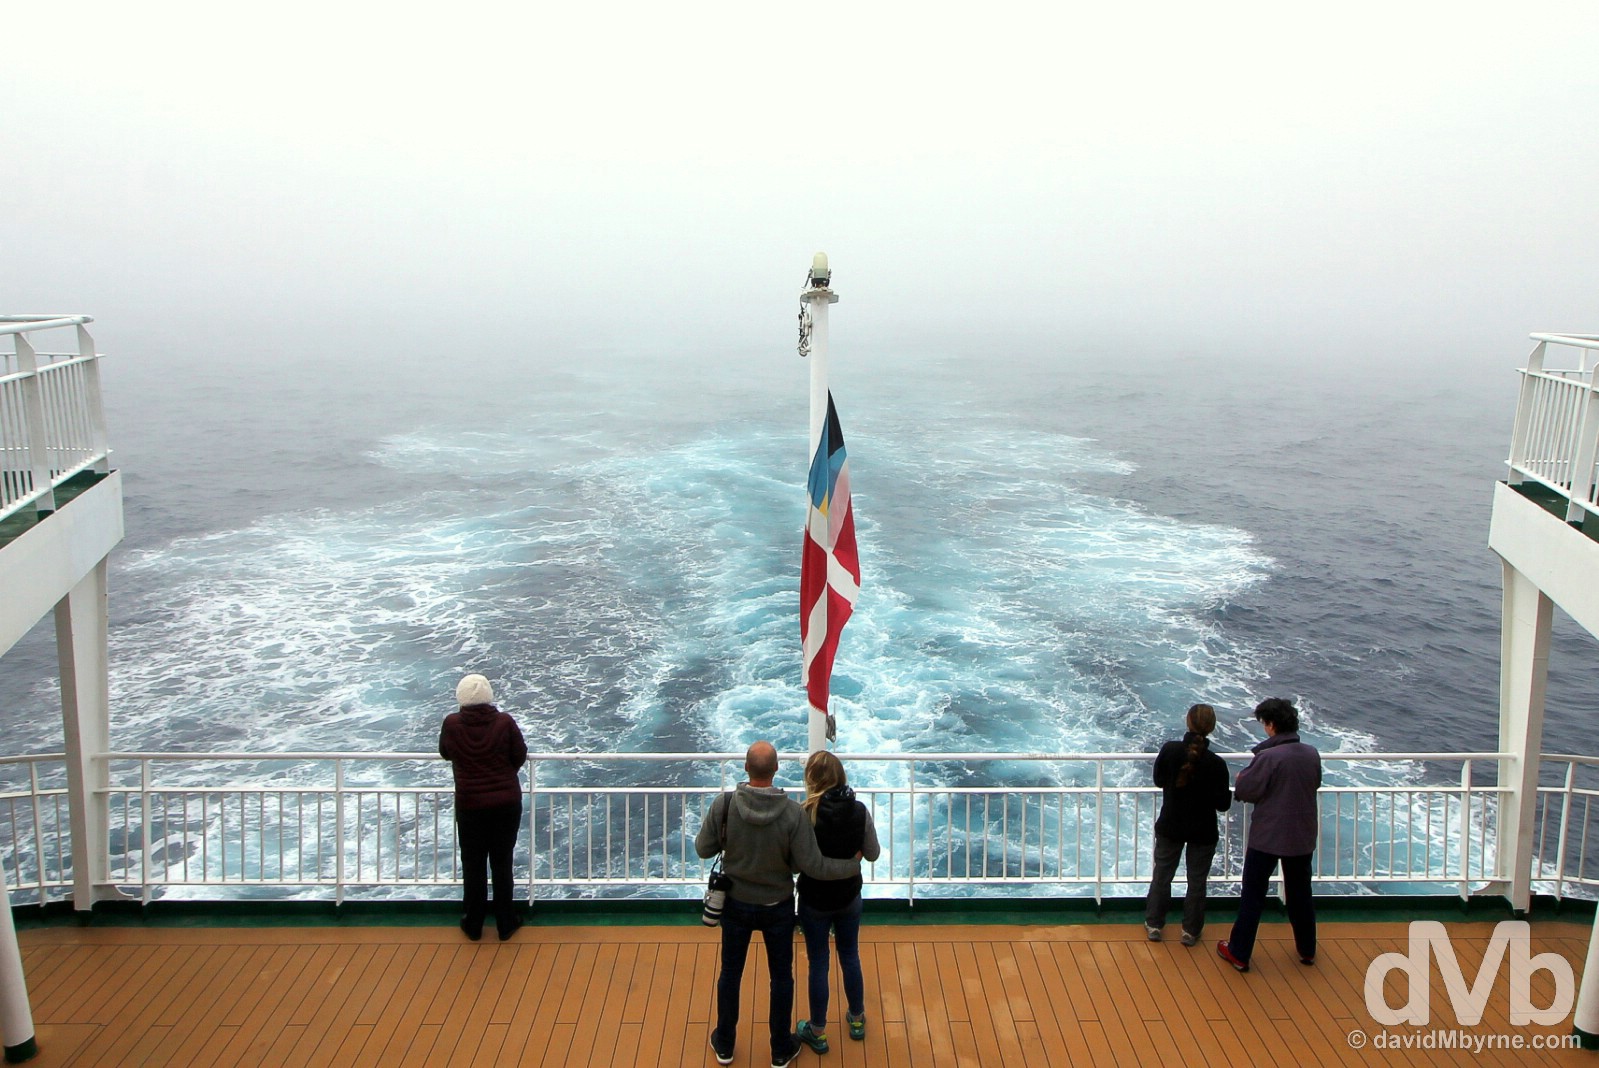 Plain sailing. Southbound across the notorious Drake Passage en route to the South Shetland Islands aboard the M/V Ocean Endeavour. November 27, 2015.